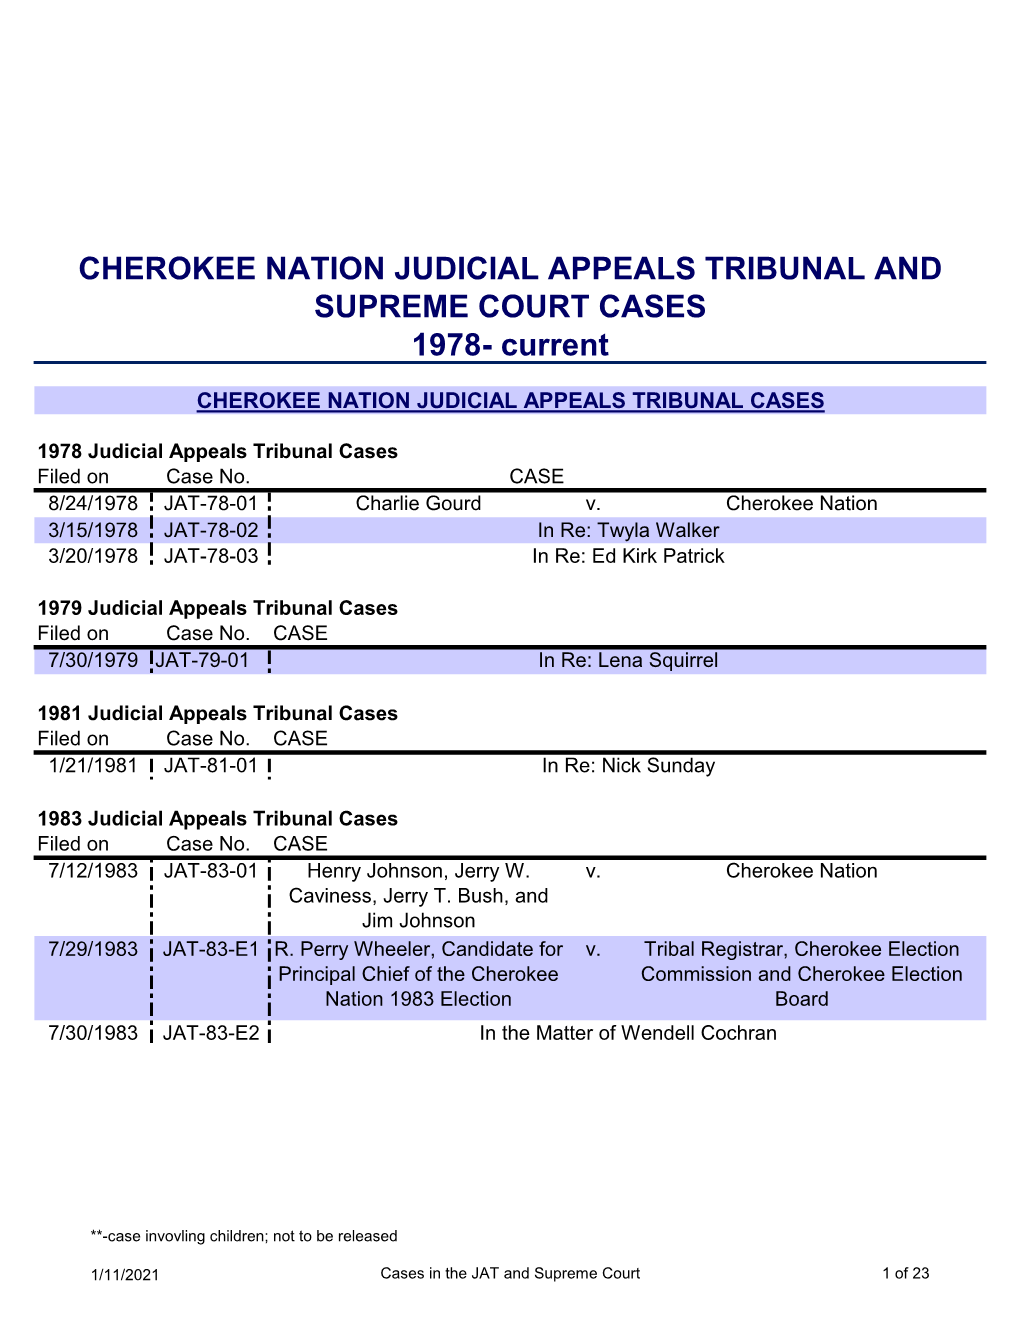 CHEROKEE NATION JUDICIAL APPEALS TRIBUNAL and SUPREME COURT CASES 1978- Current